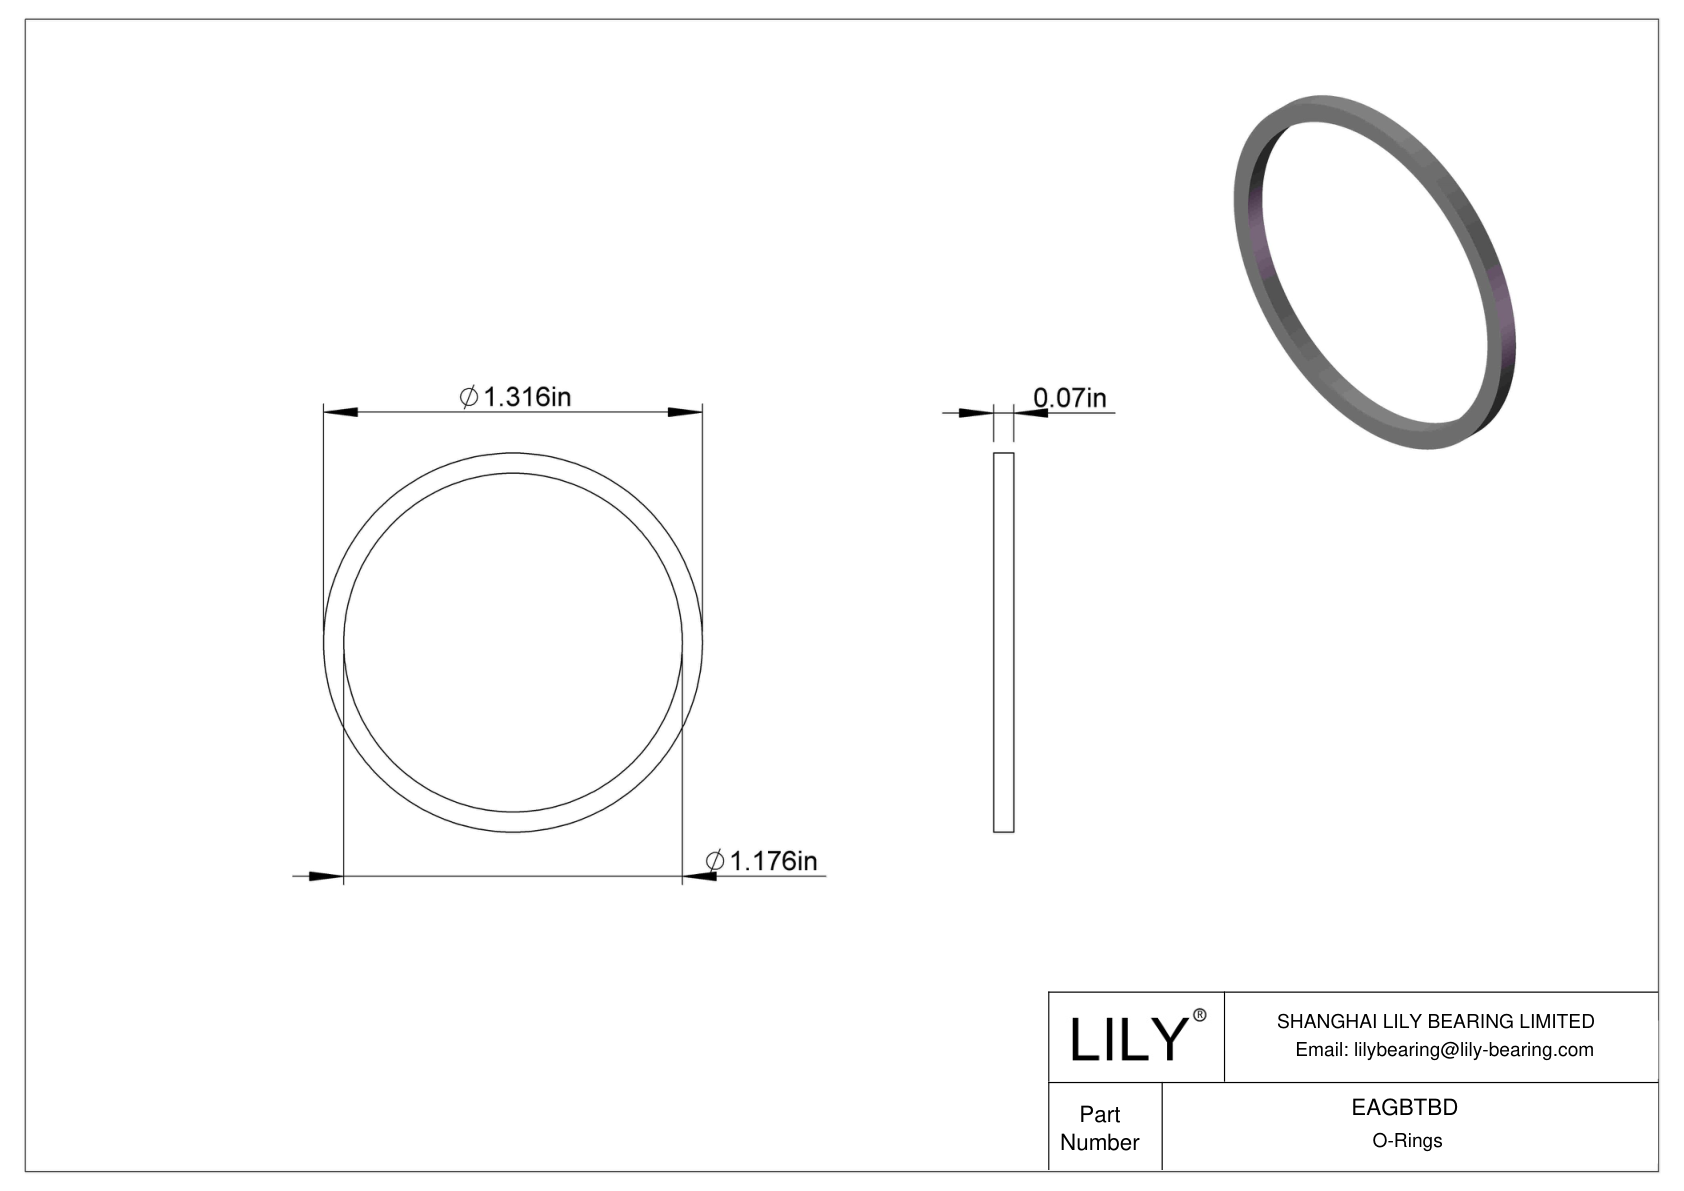 EAGBTBD Oil Resistant O-Rings Square cad drawing